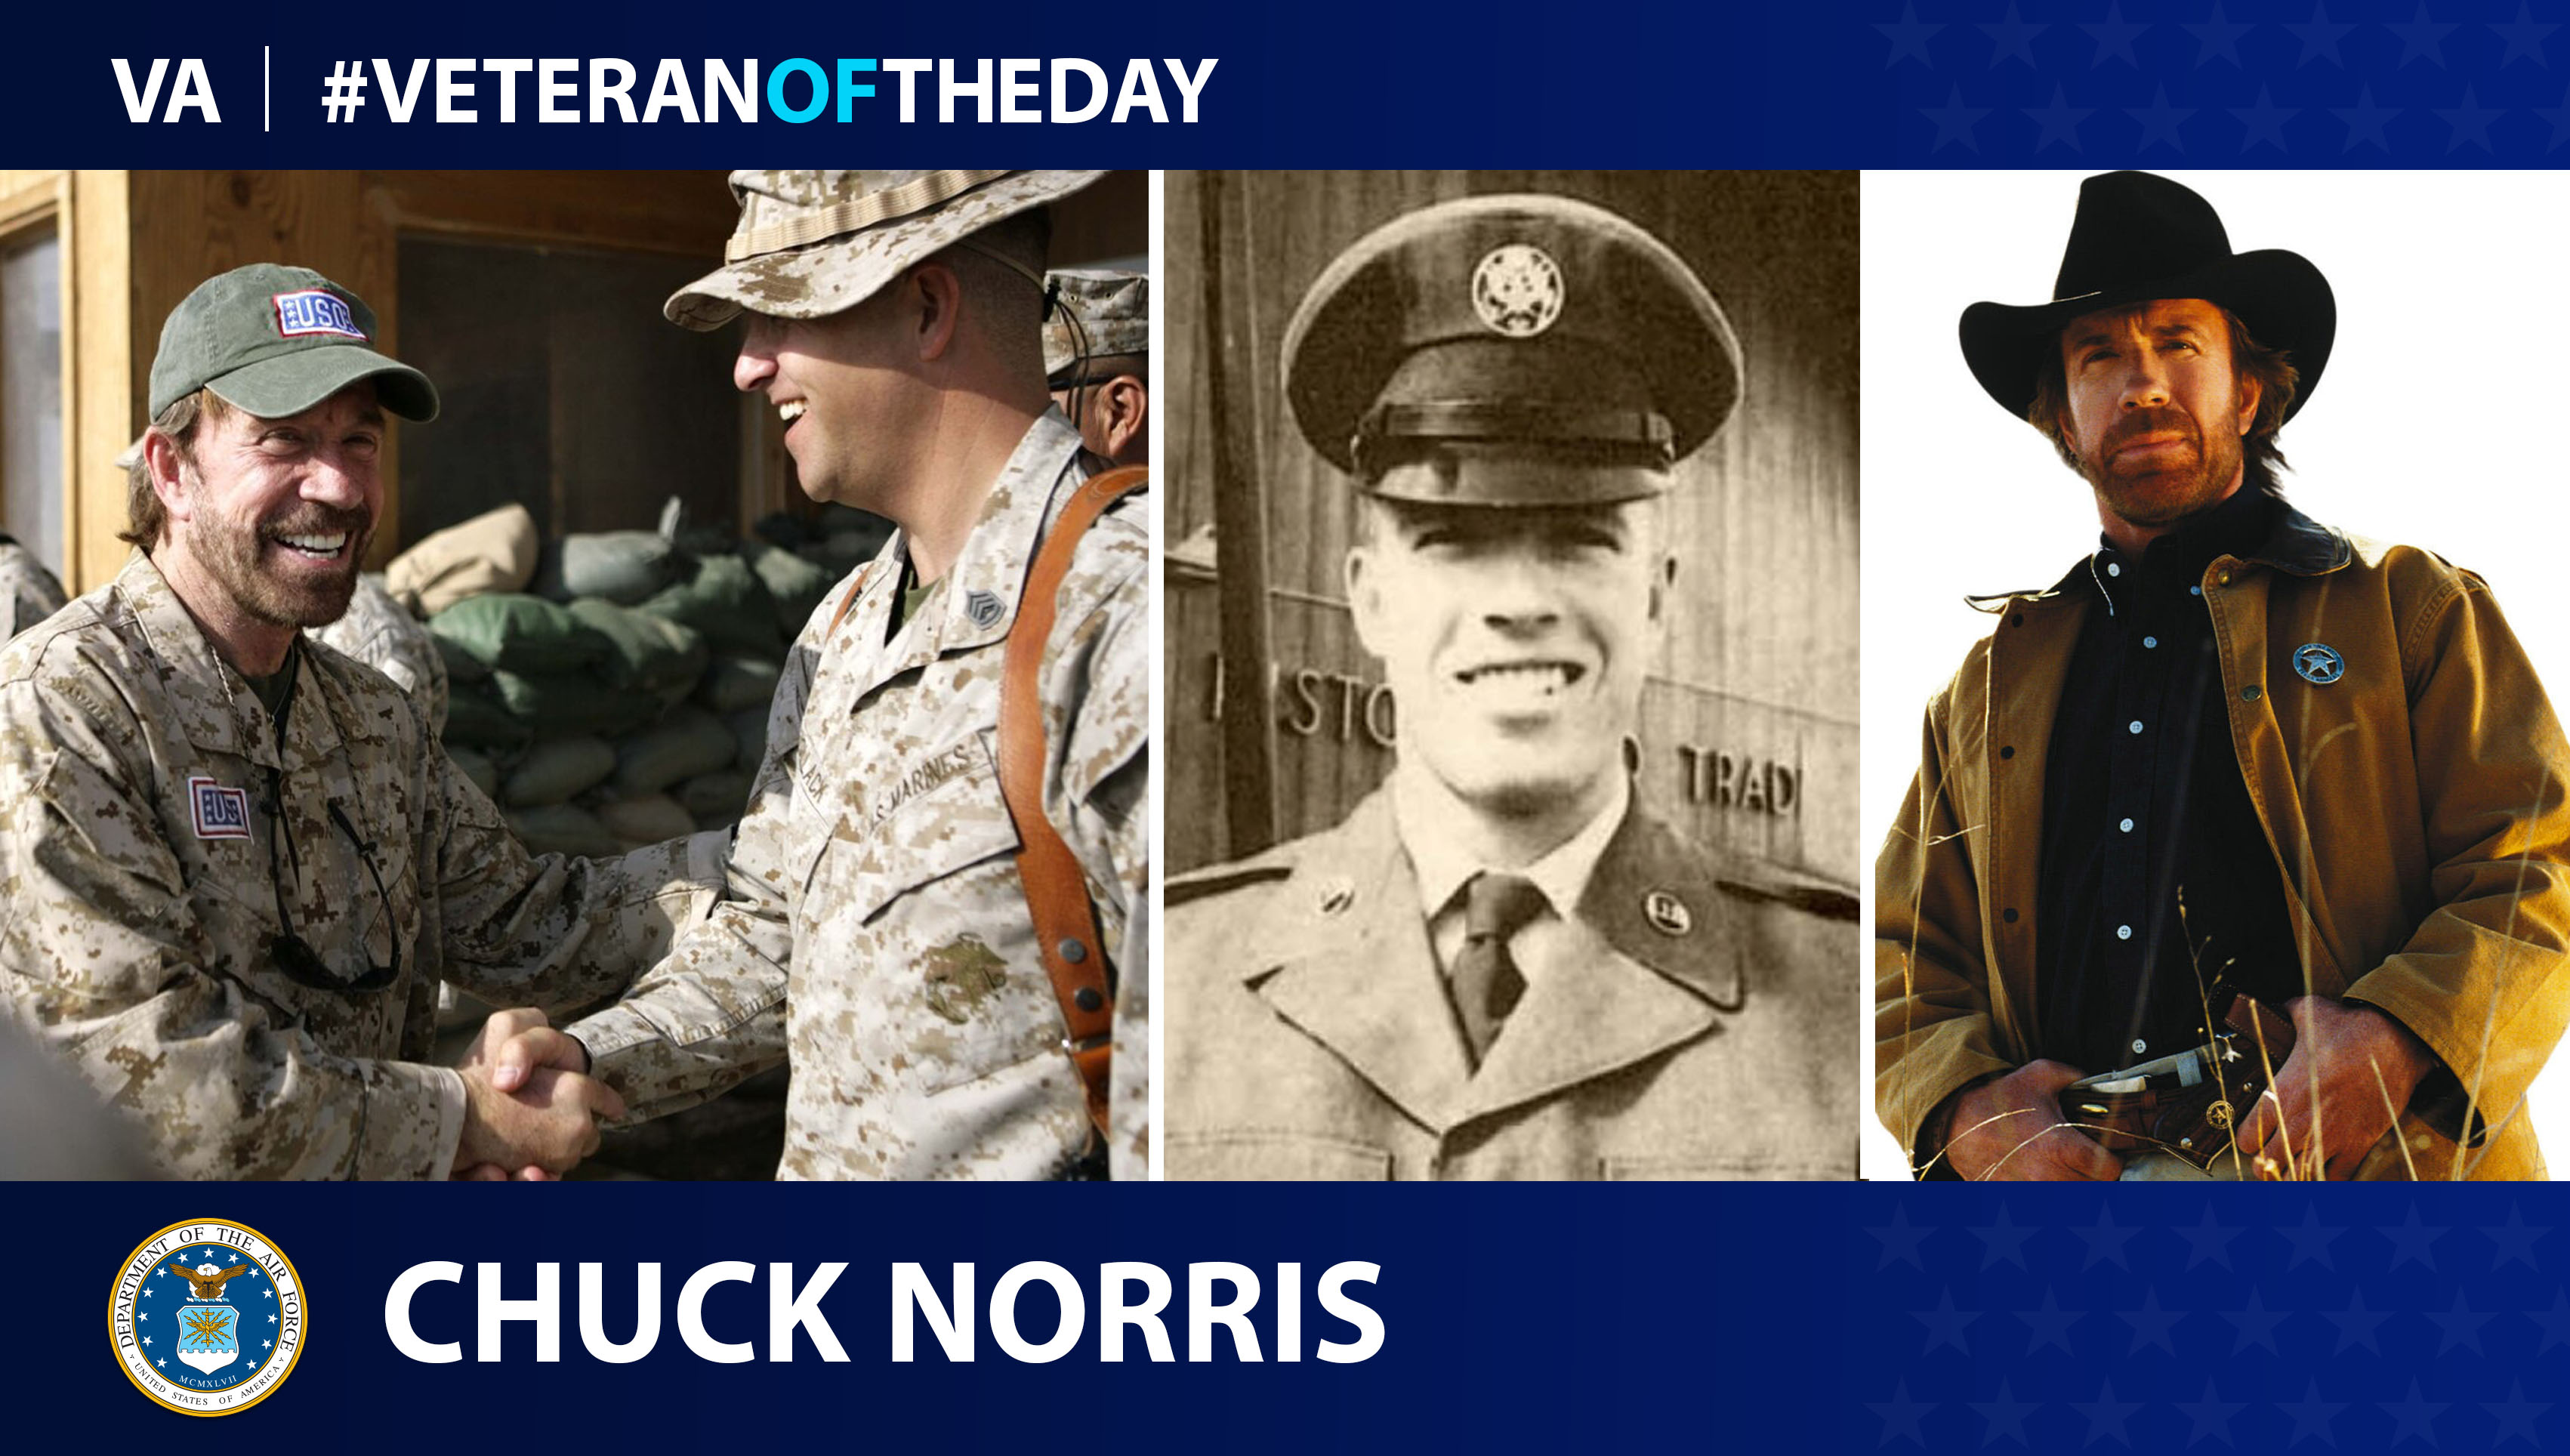 Air Force Veteran Chuck Norris is today's Veteran of the Day.